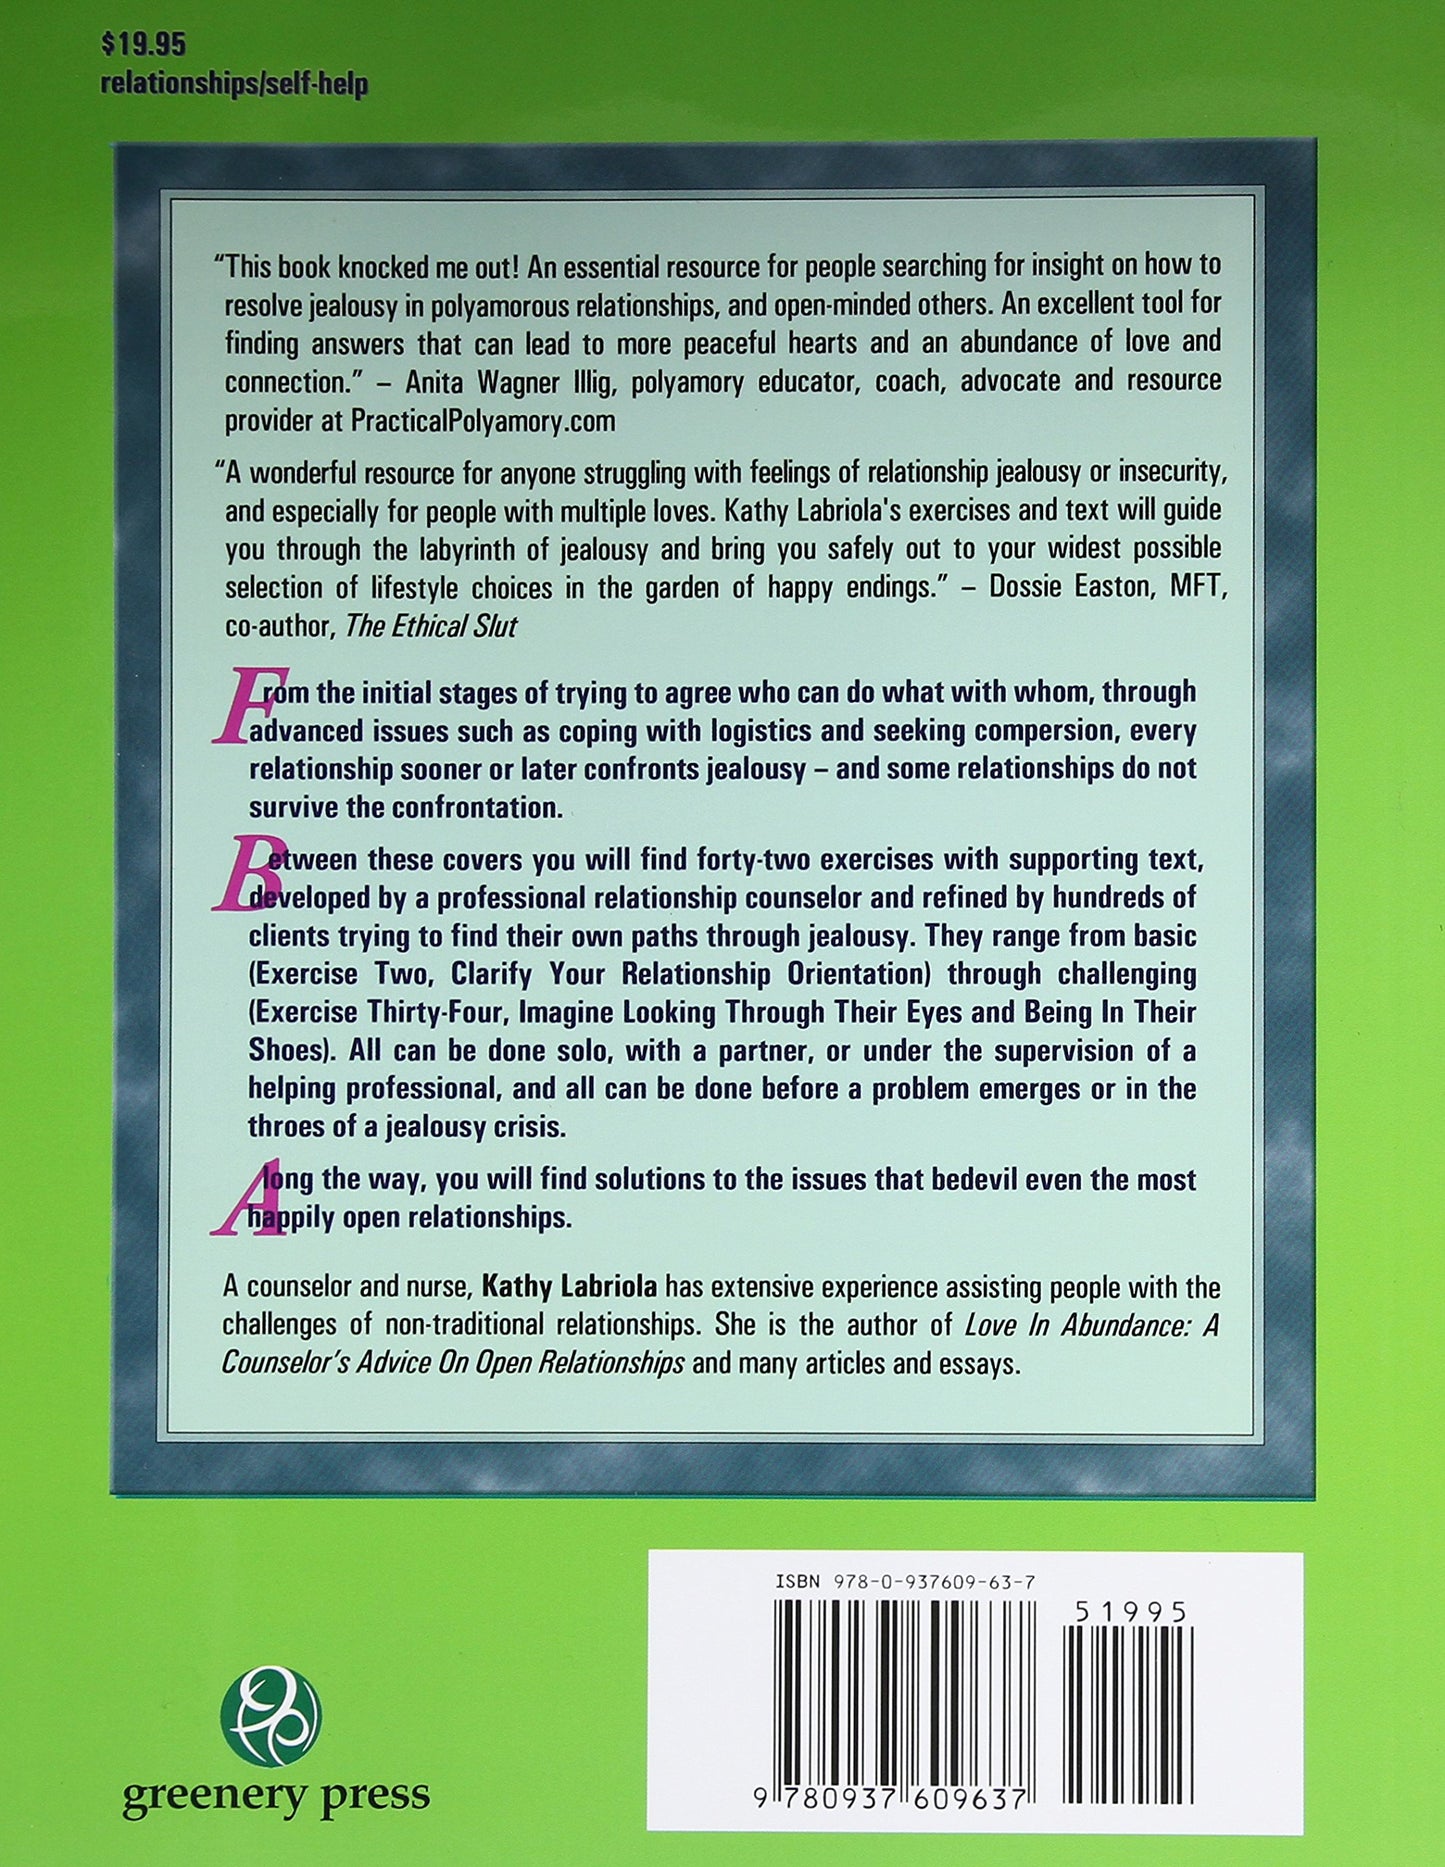 The back cover of The Jealousy Workbook Kathy - Labriola.